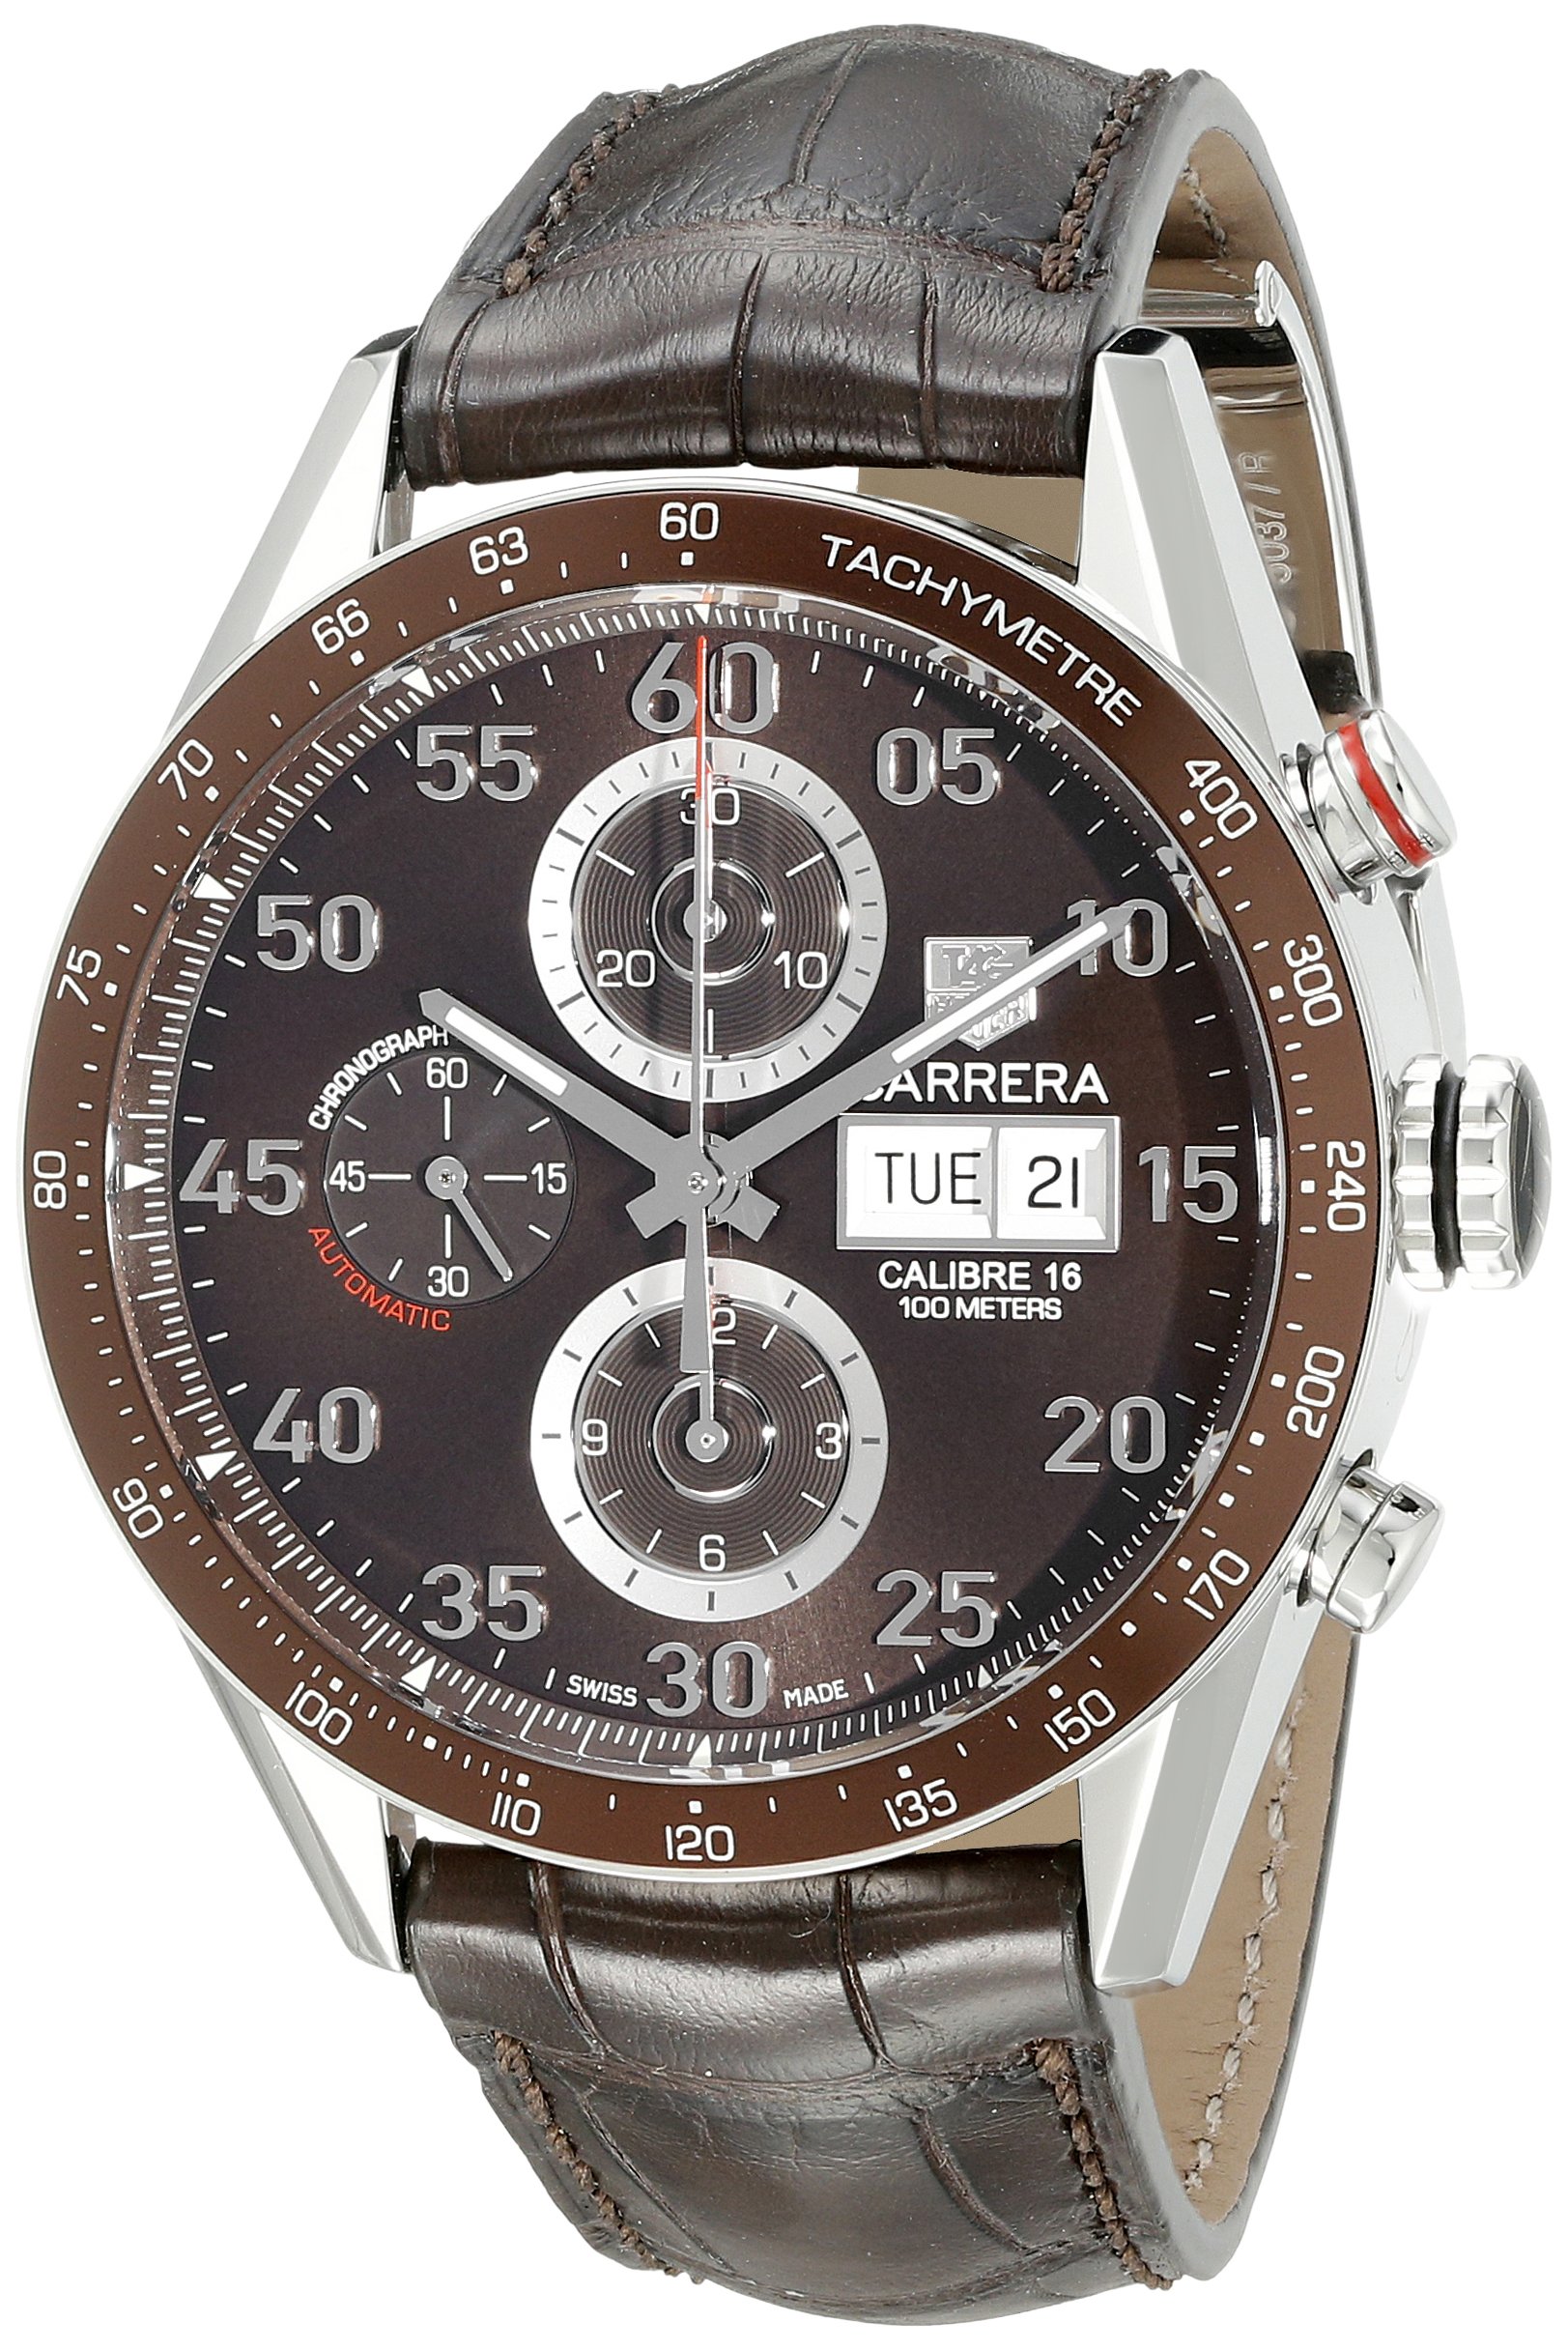 TAG Heuer Men's CV2A12.FC6236 Carrera Day Date Automatic Chronograph Watch